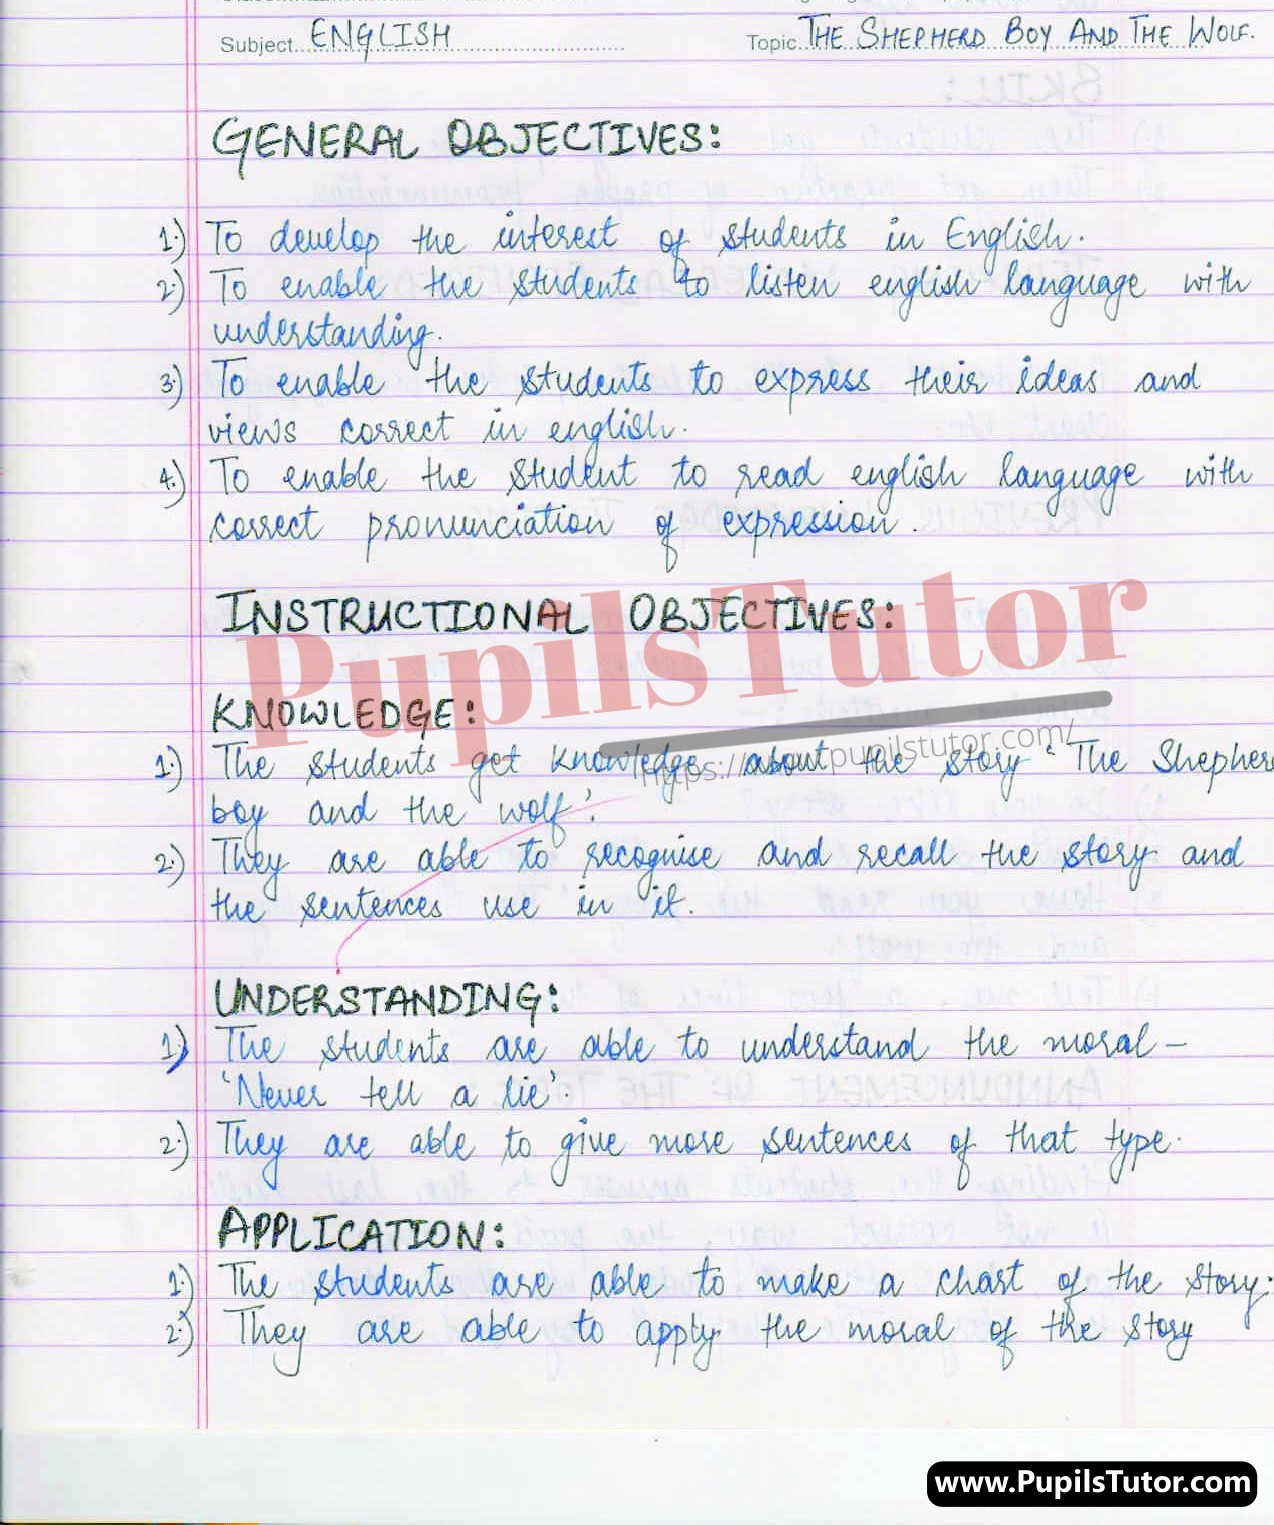 English Story Lesson Plan For Class 3 To 7 On The Shepherd Boy And The Wolf (Story) – (Page And Image Number 1) – Pupils Tutor